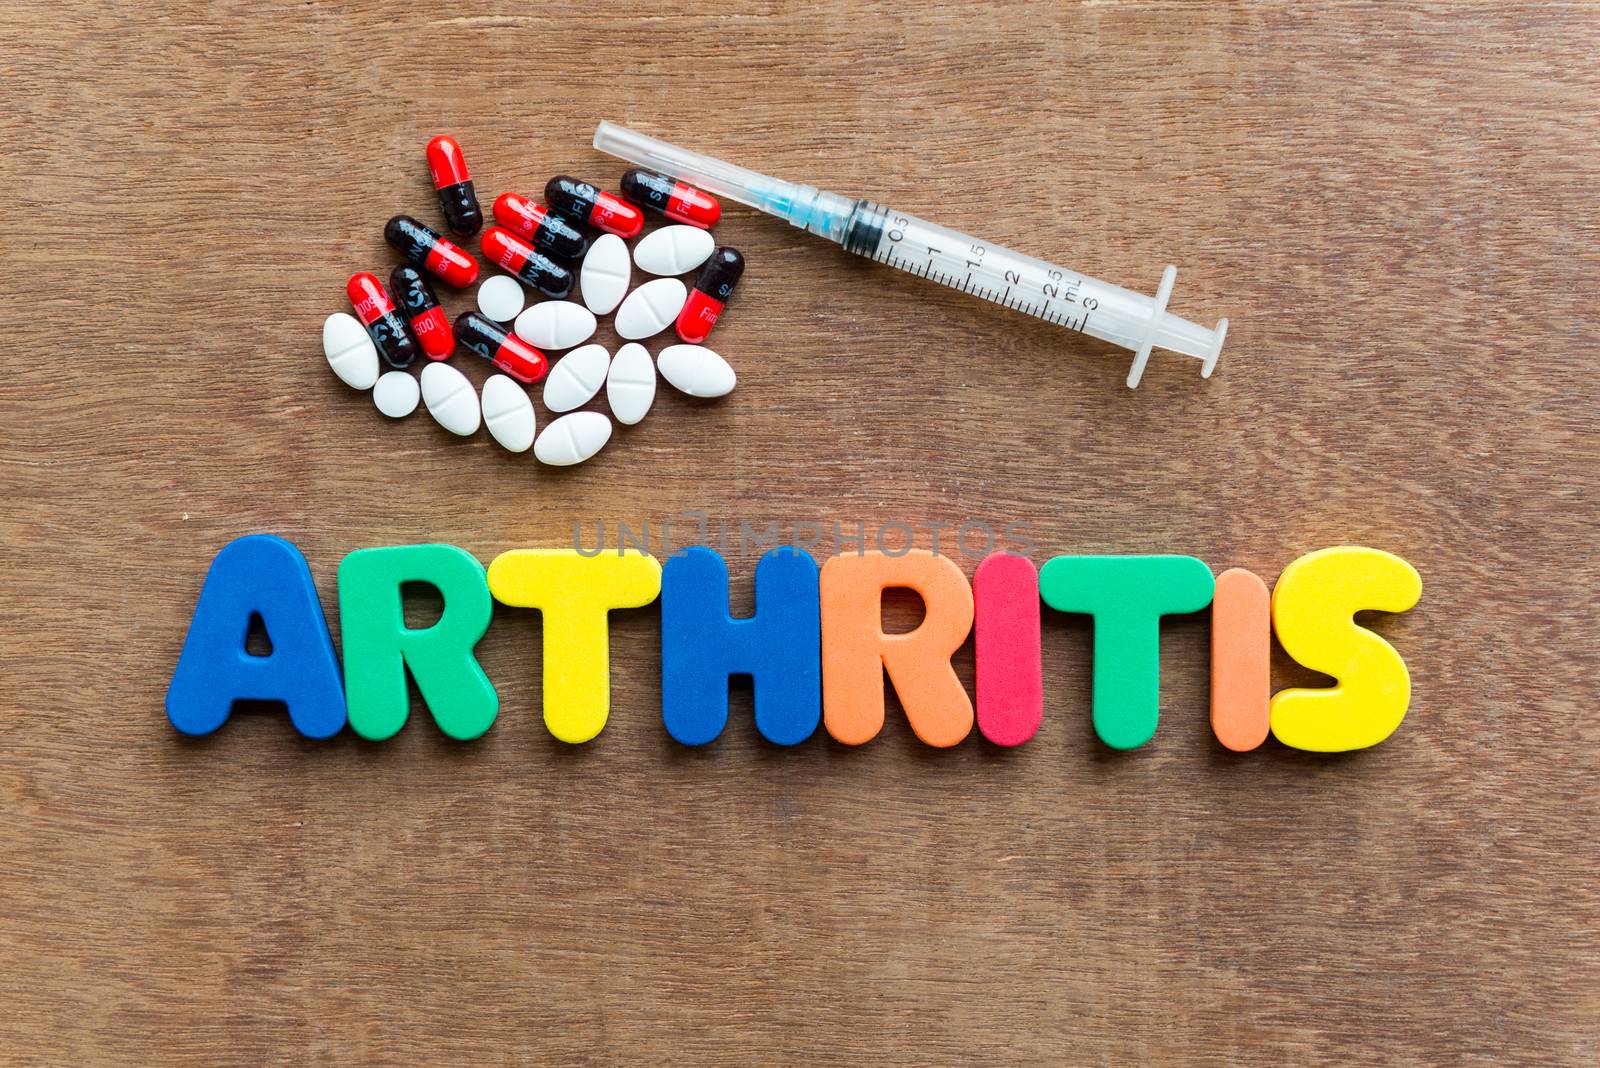 arthritis colorful word in the wooden background